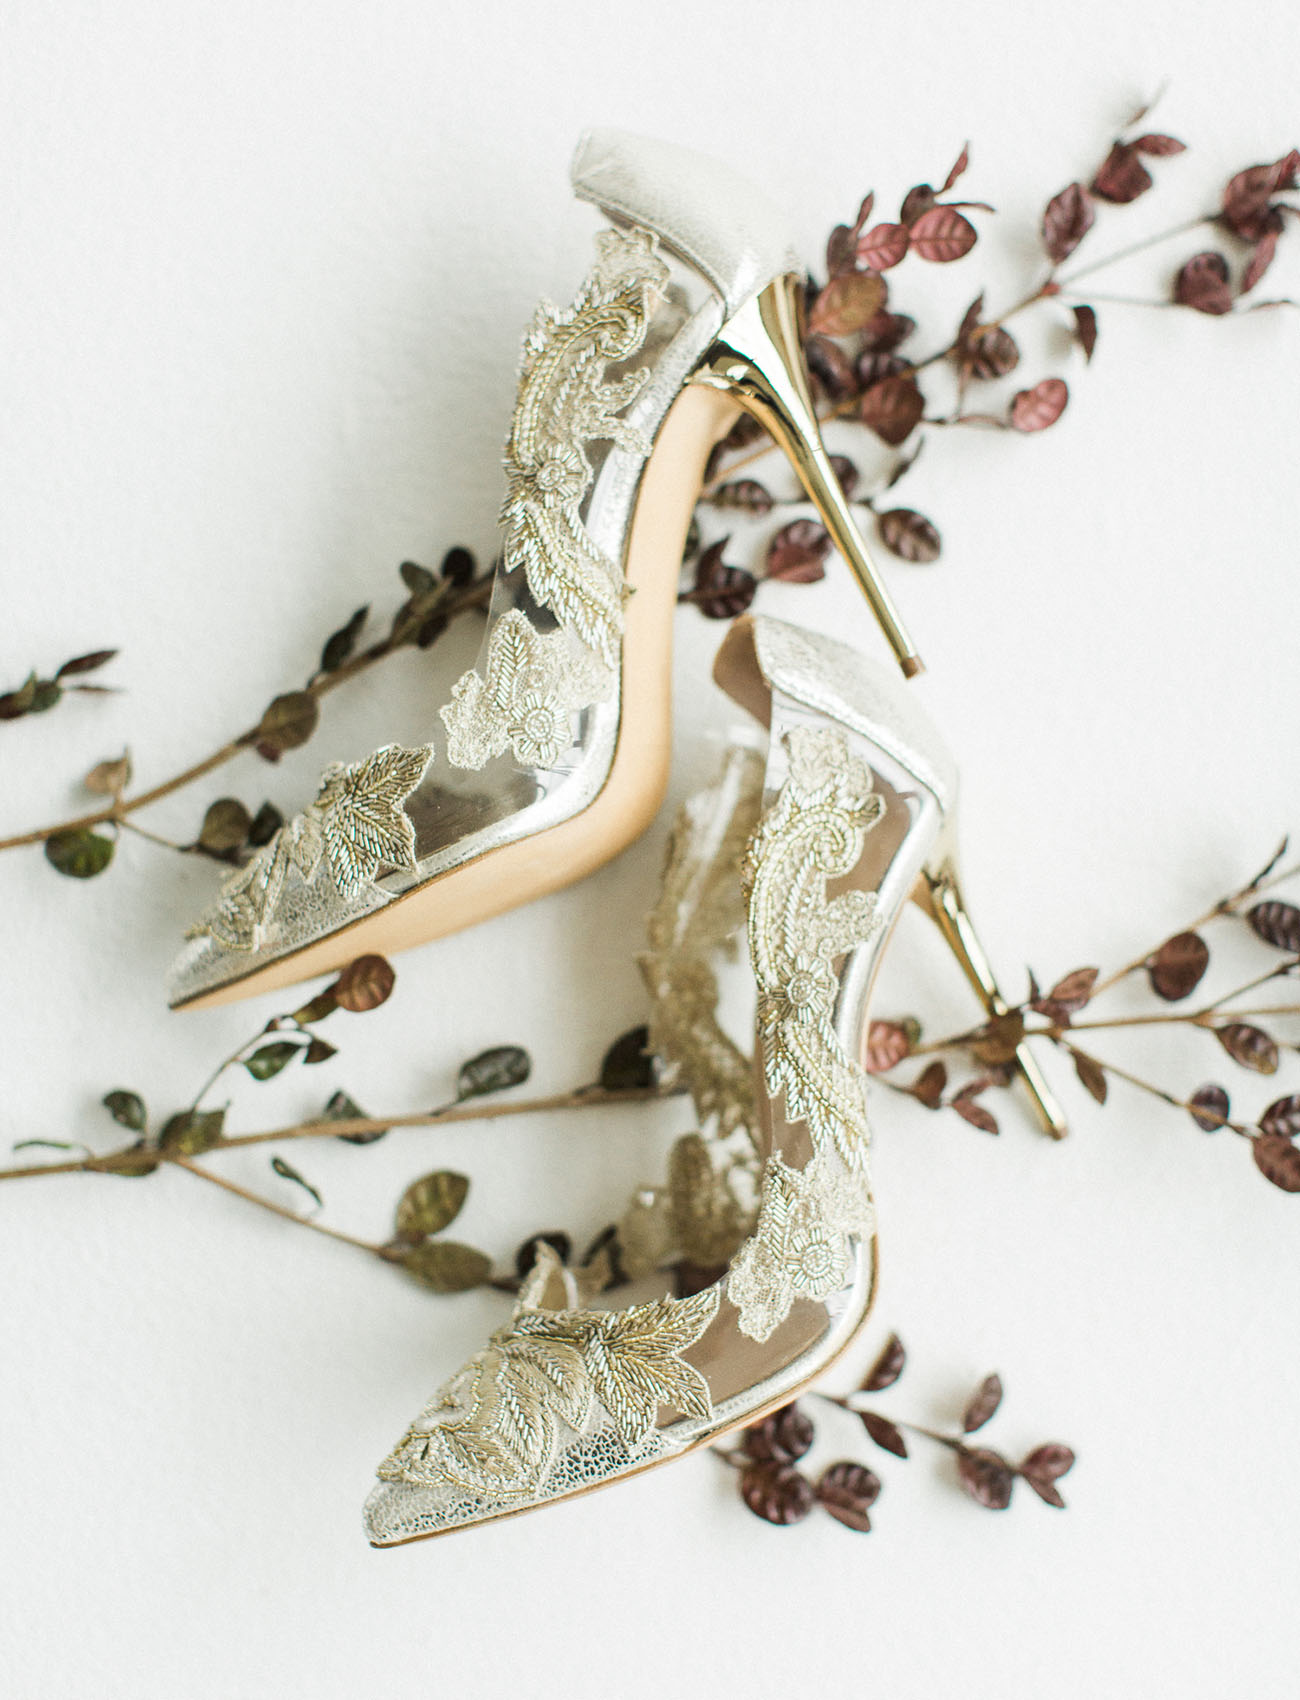 The bridal shoes were gold lace stiletto heels by Oscar De La Renta, they look really wow and stunning